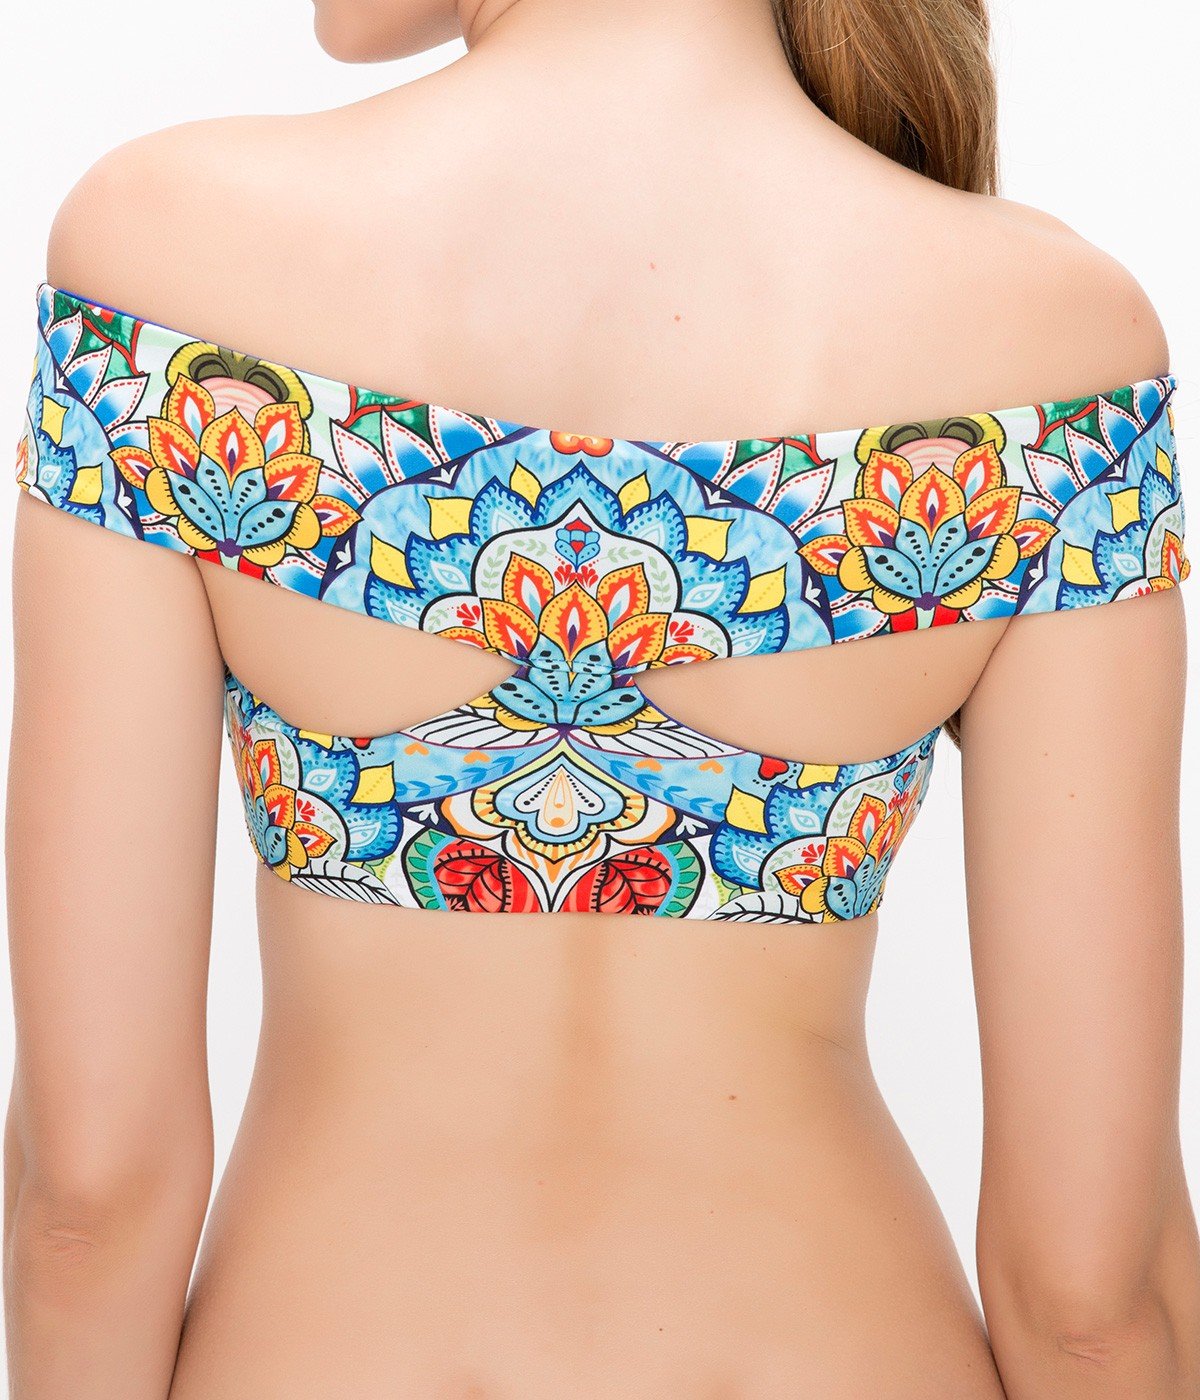 Adore Strapless Top